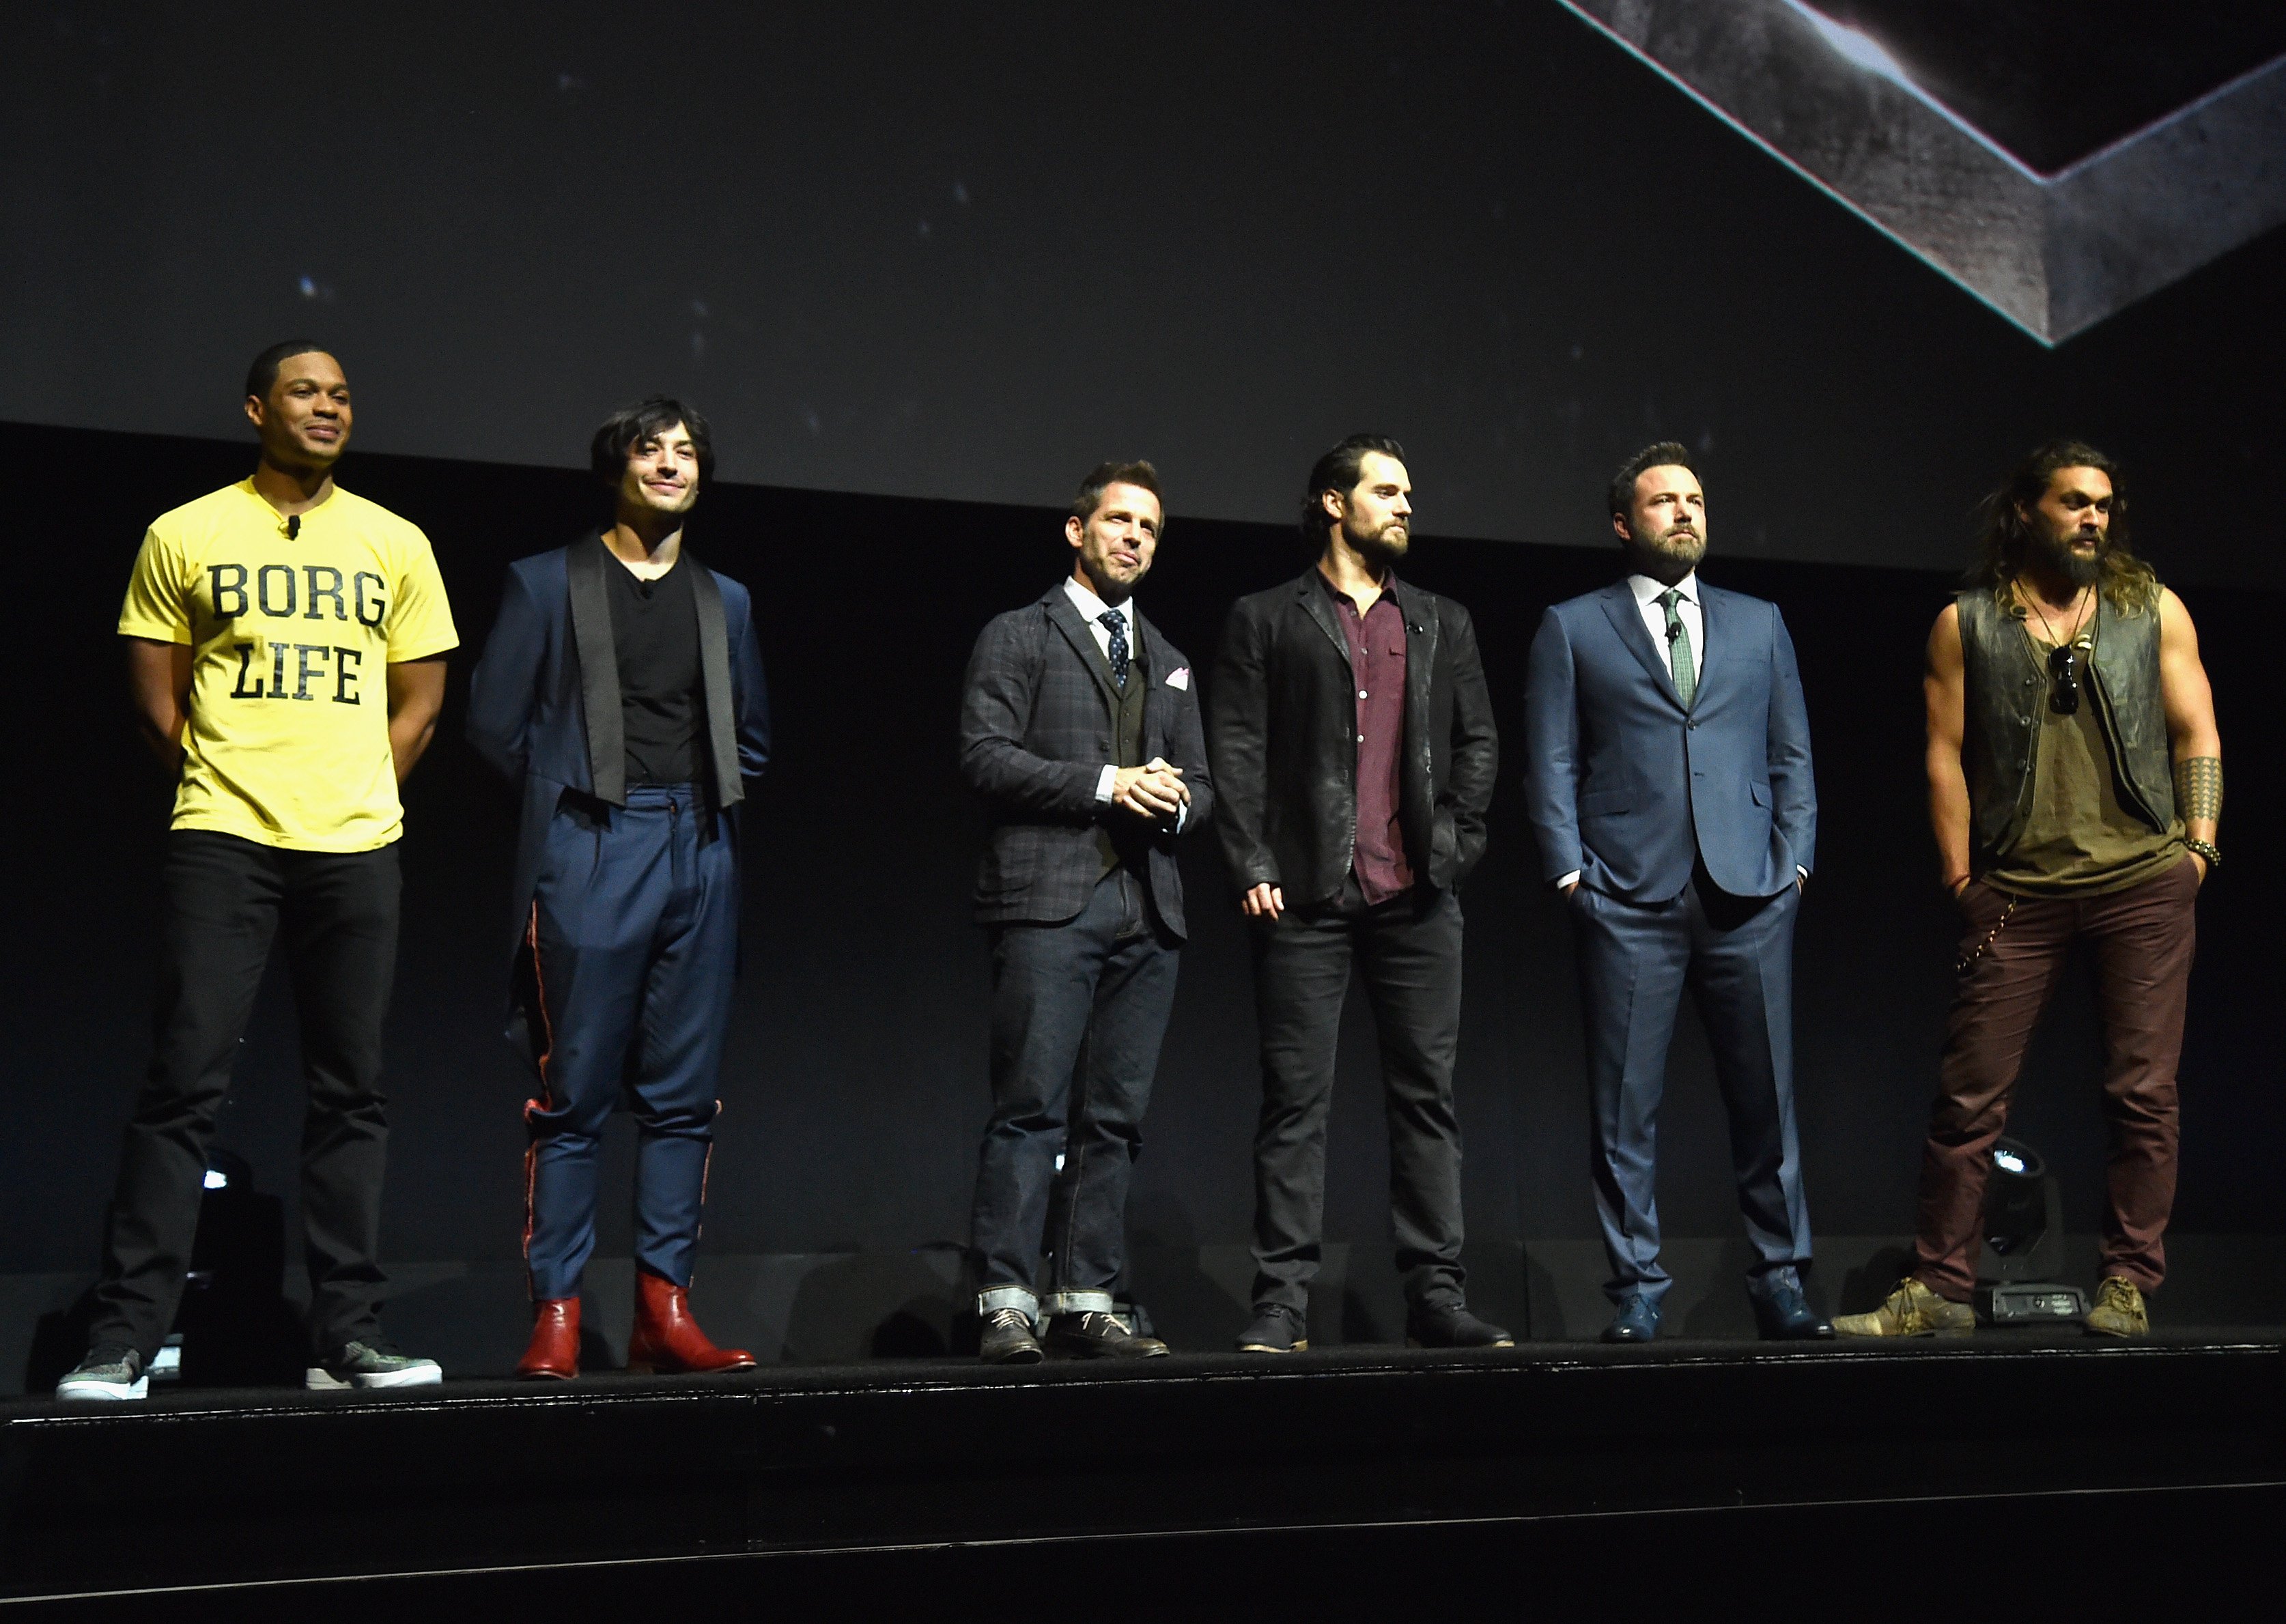 Ray Fisher, Ezra Miller, Zack Snyder, Henry Cavill, Ben Affleck and Jason Momoa appear onstage at CinemaCon 2017 on March 29, 2017 in Las Vegas